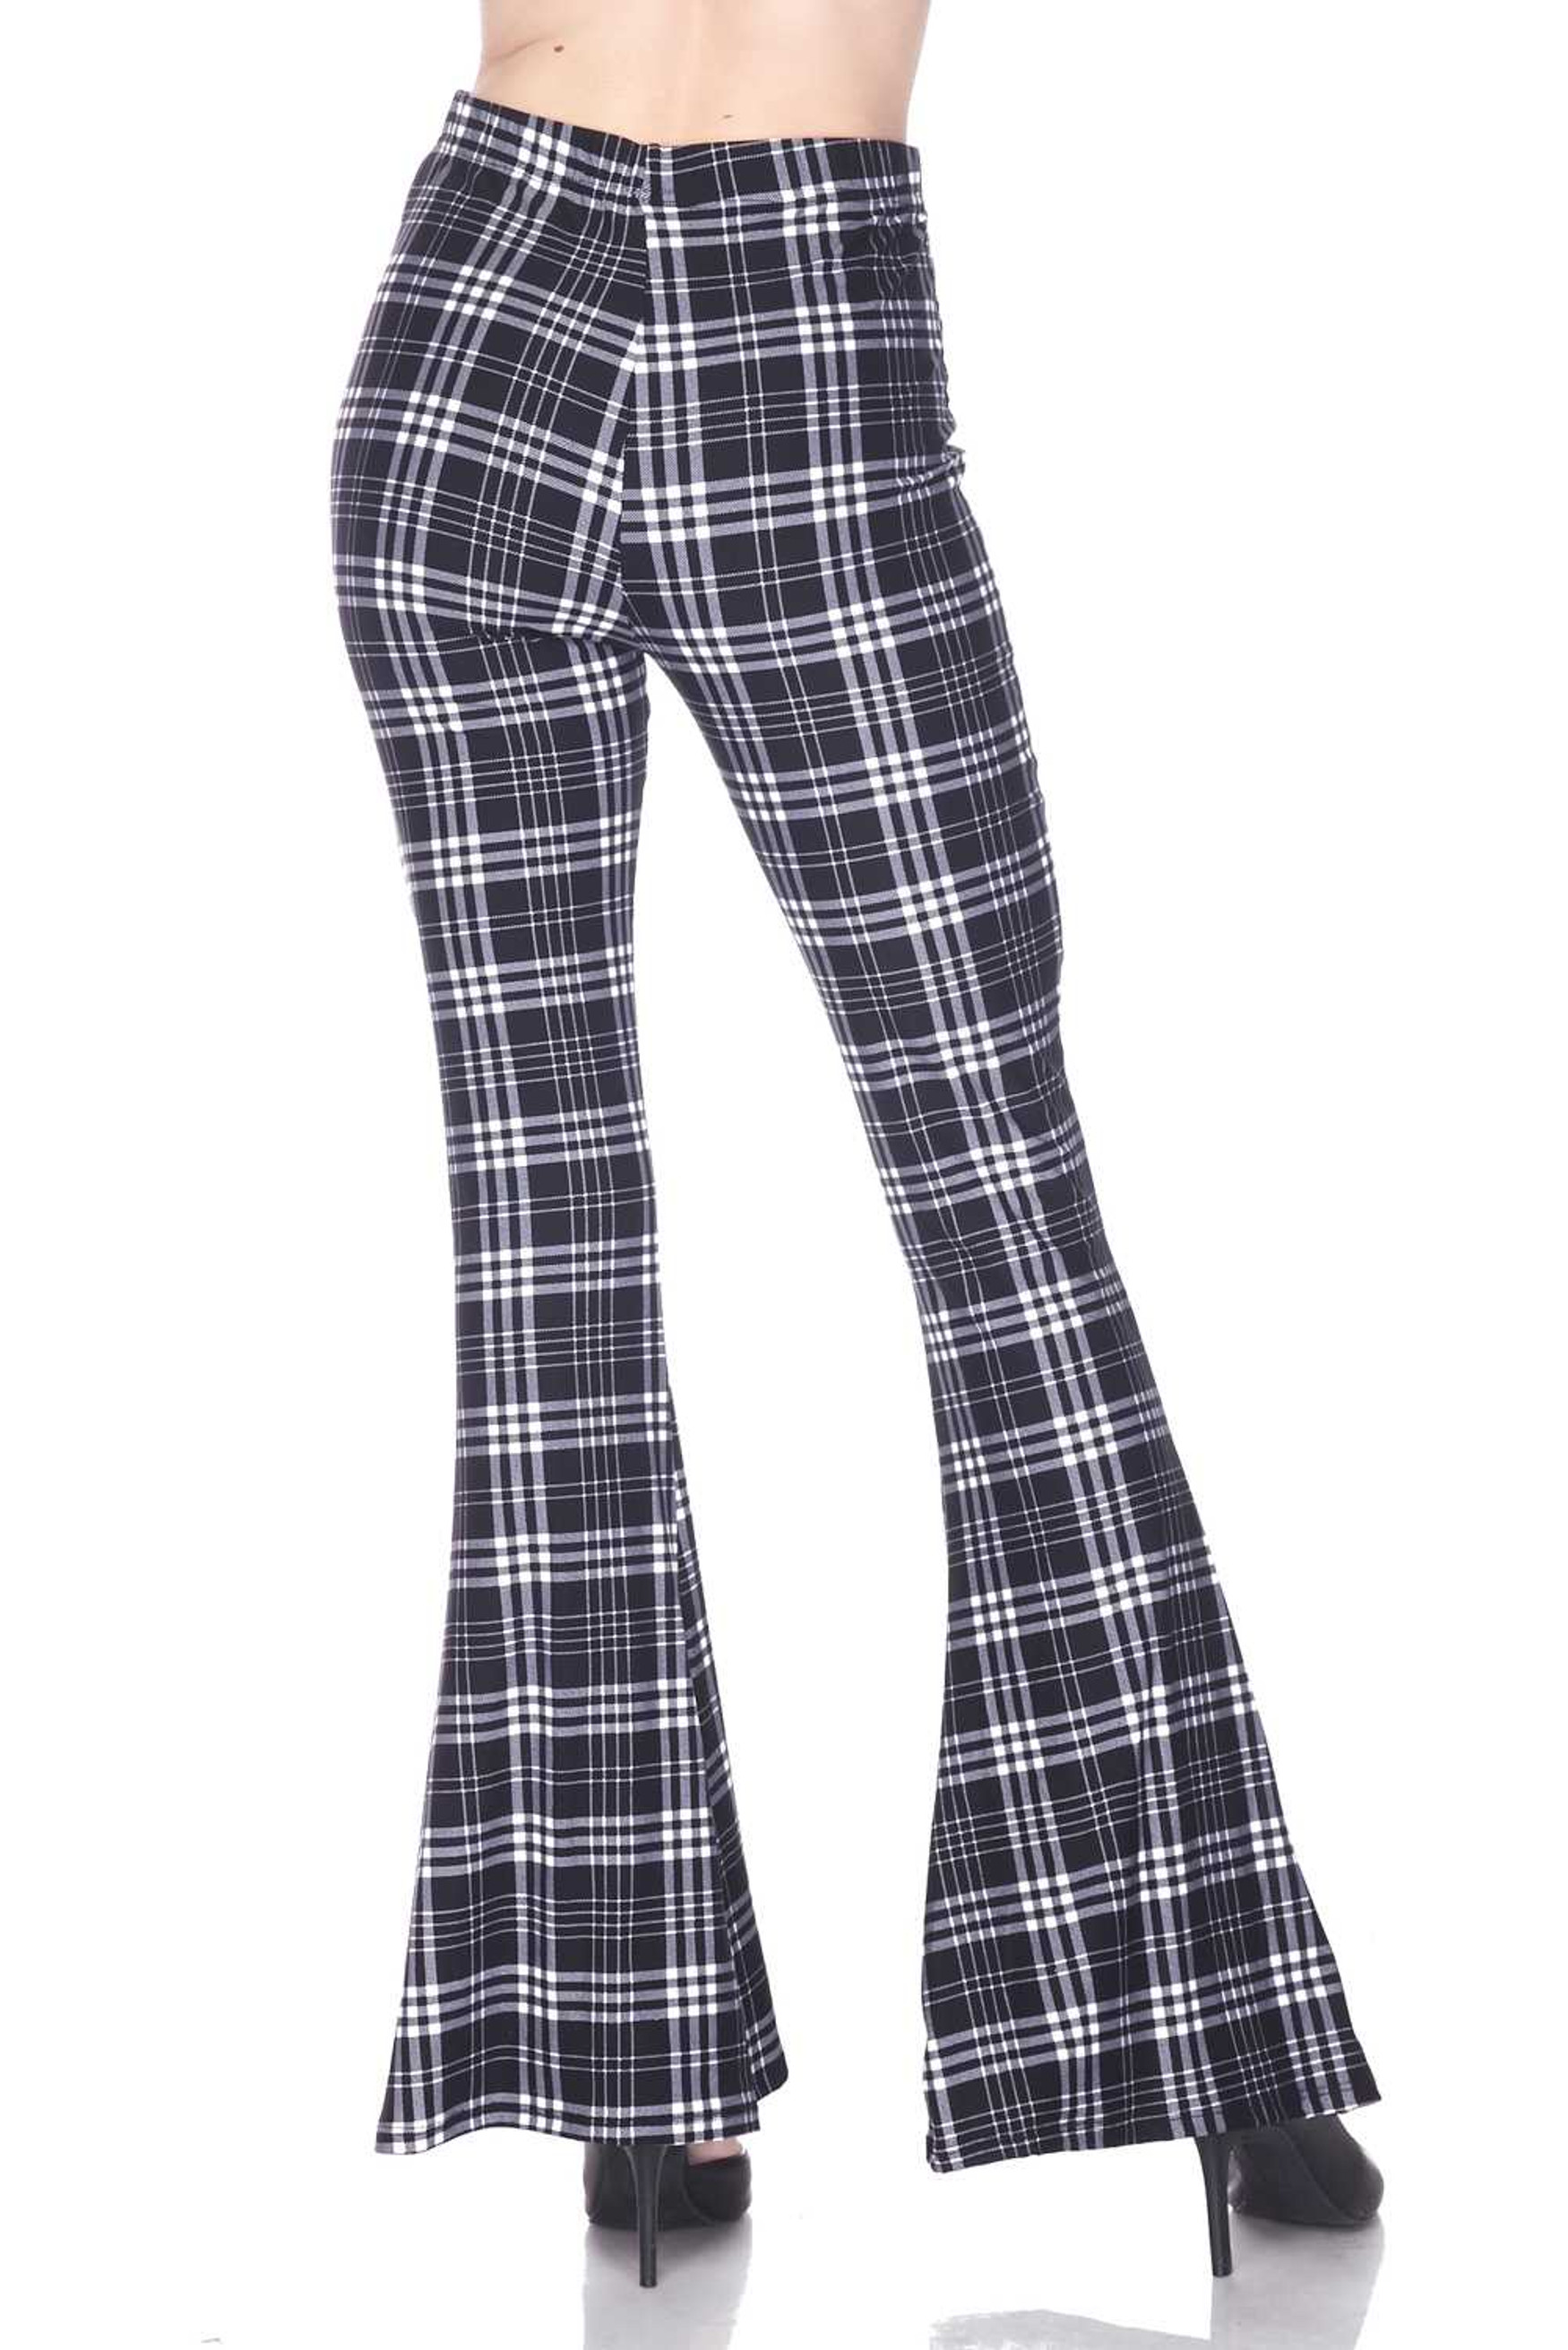 Buttery Smooth Traditional Black and White Plaid Bell Bottom Leggings